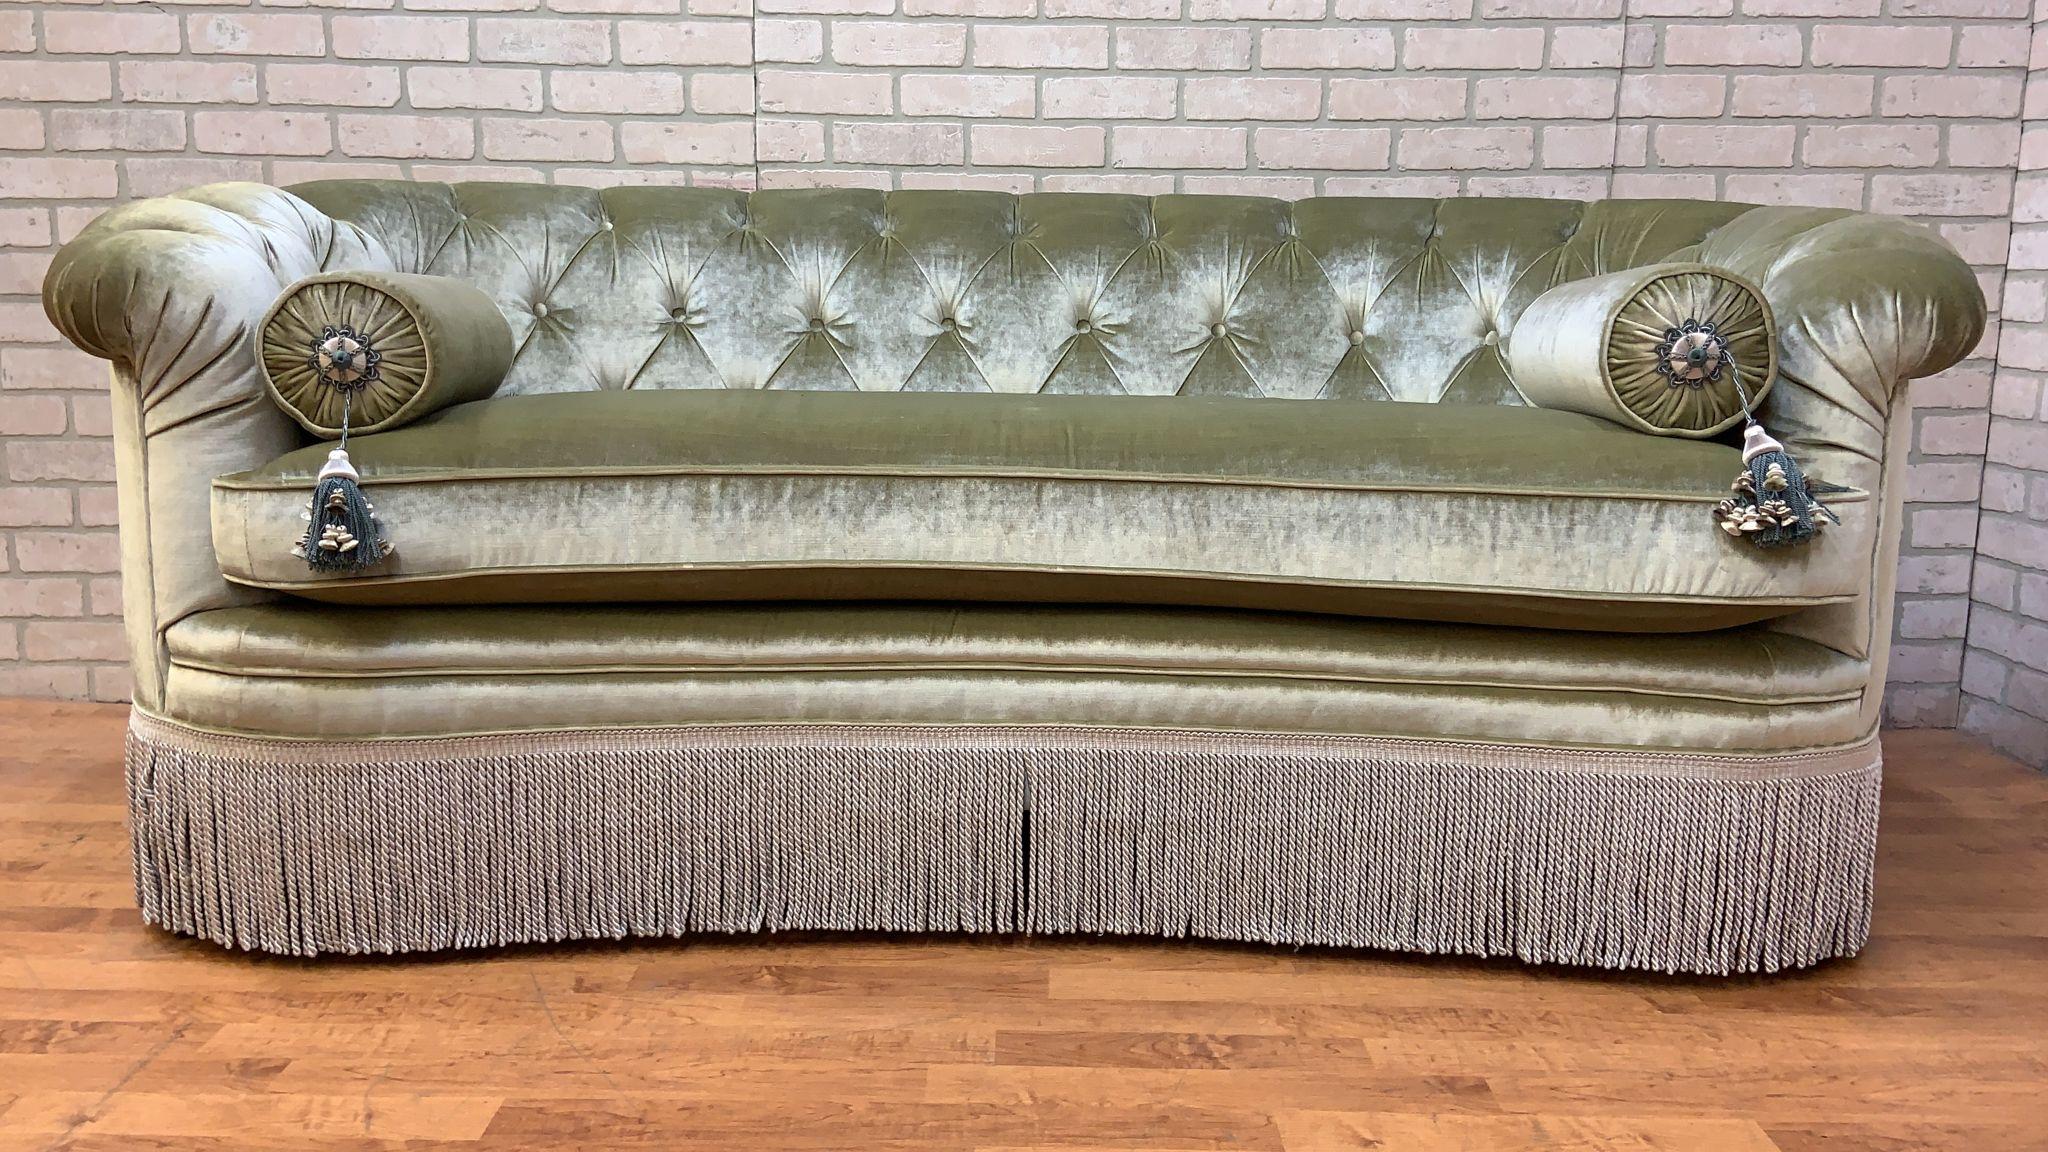 Vintage Art Deco Curved Back Tufted Fringe Silver Crushed Velvet Loveseat 

This amazing curved back Art Deco Tufted Fringe Silver Crushed Velvet Loveseat would be an amazing addition to any living space. The loveseat comes with two silver crushed